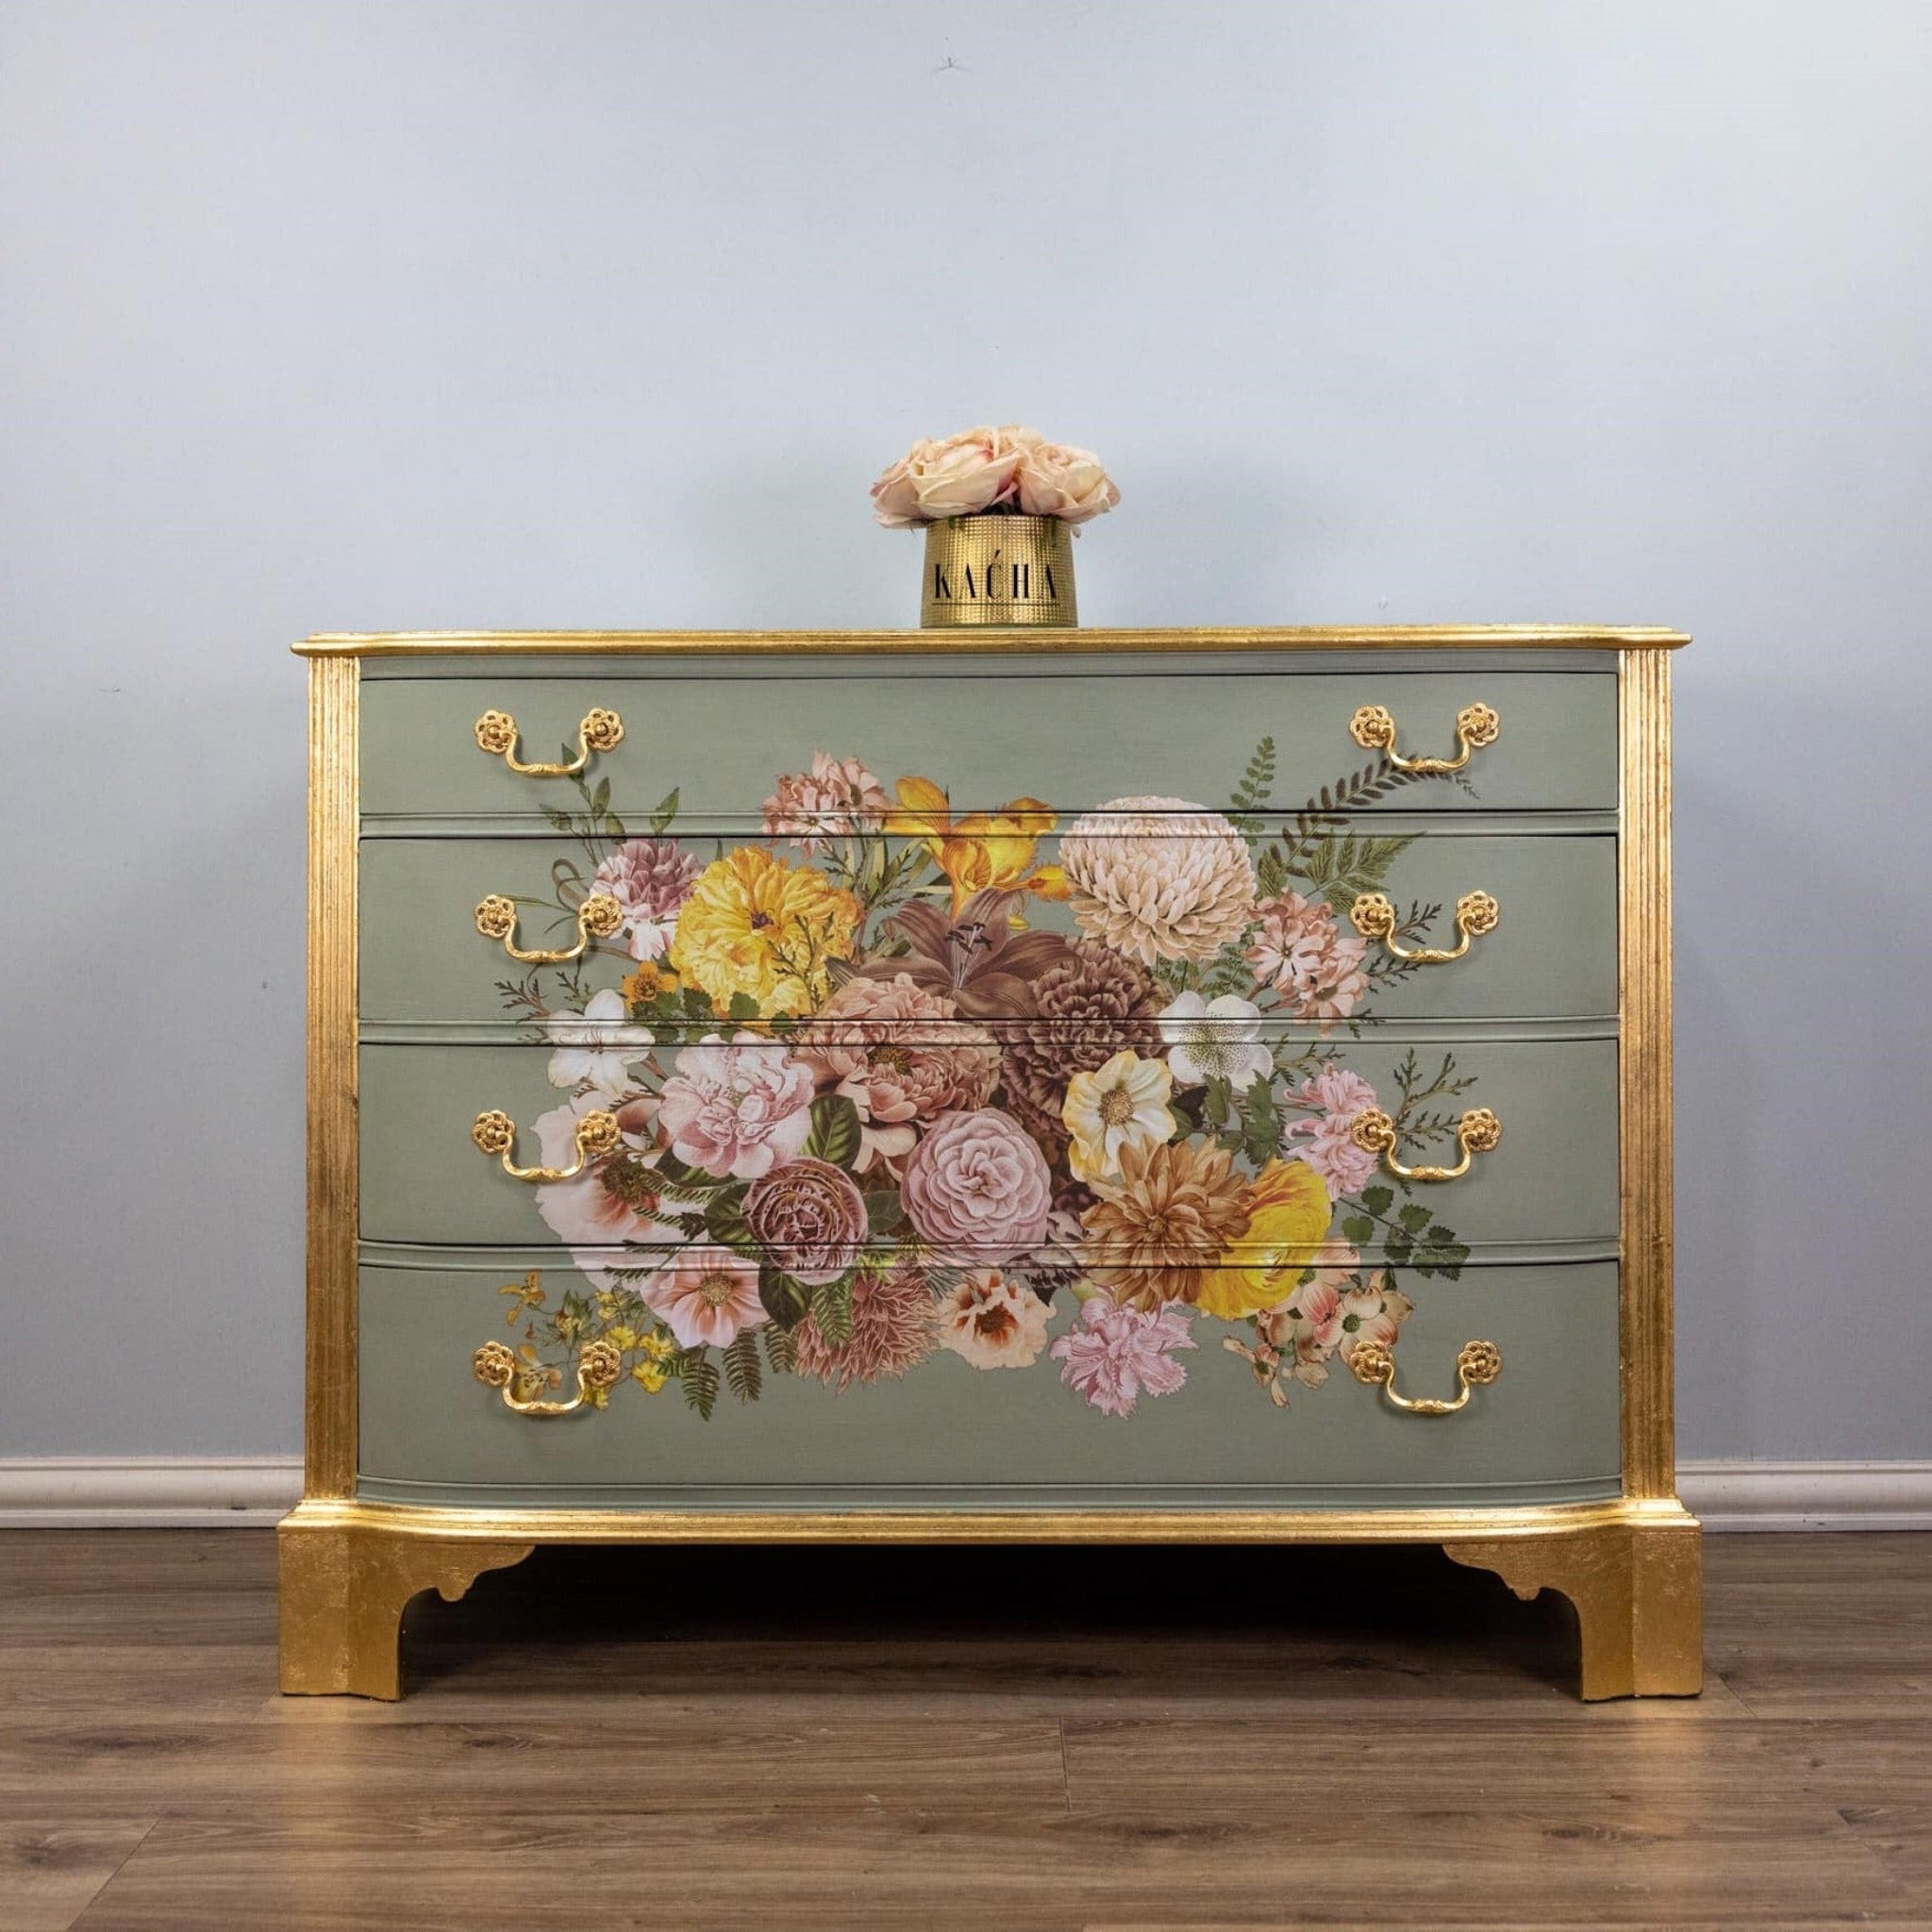 A vintage dresser refurbished by Kacha is painted a soft sage green with gold accents and features ReDesign with Prima's Kacha Woodland Floral transfer in the center of its 4 drawers.